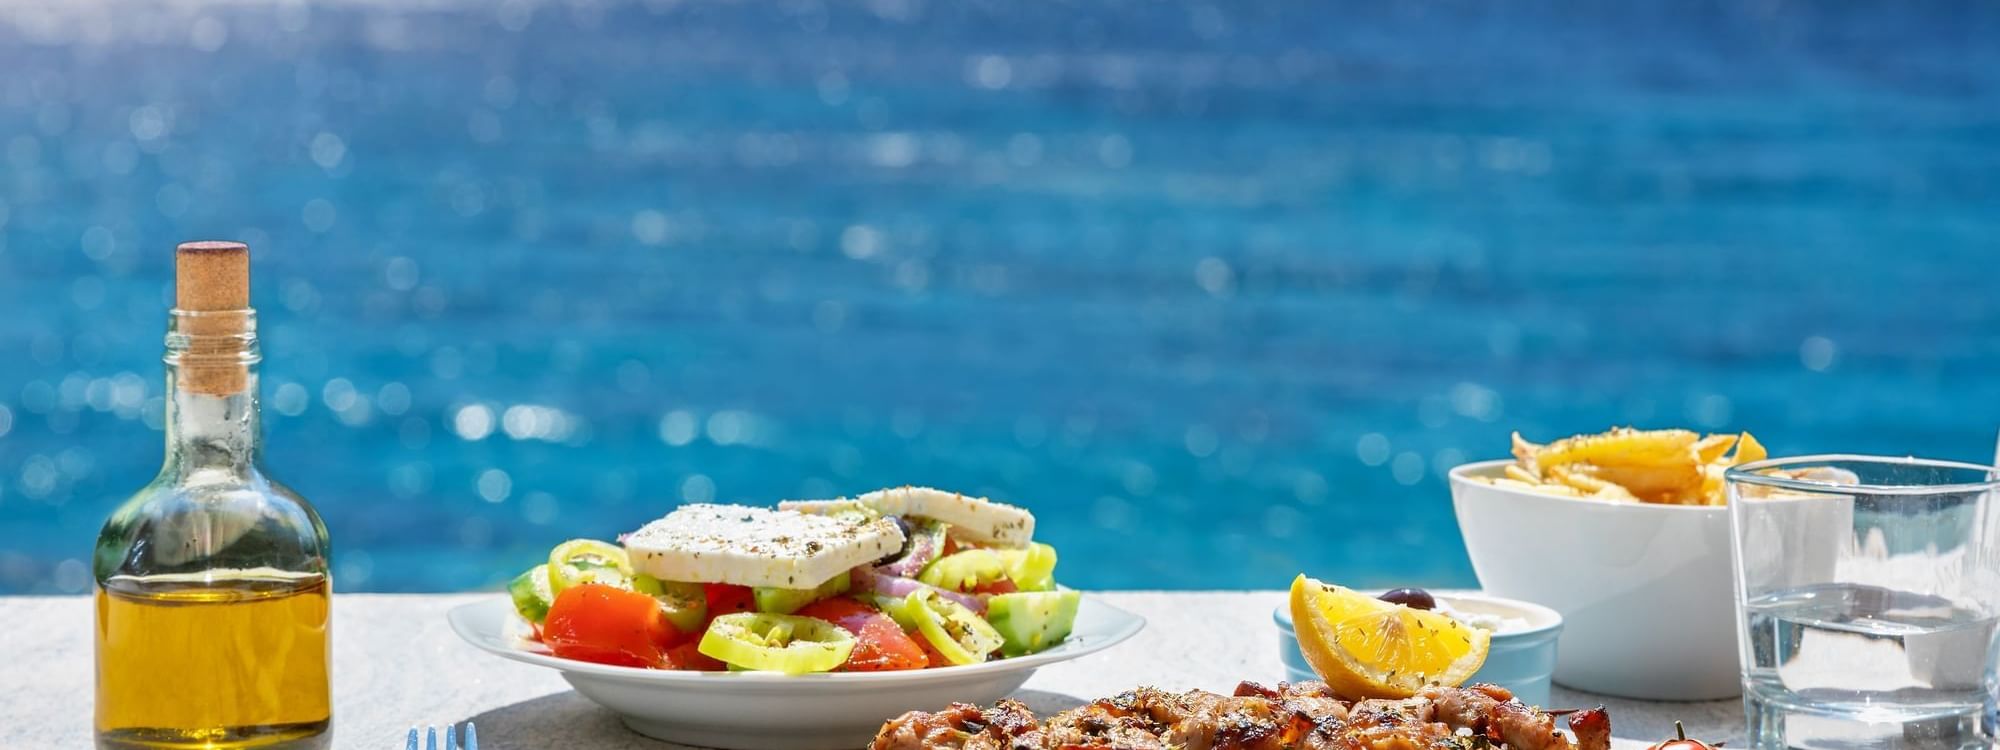 Dishes served with a sea view at Daydream Island Resort